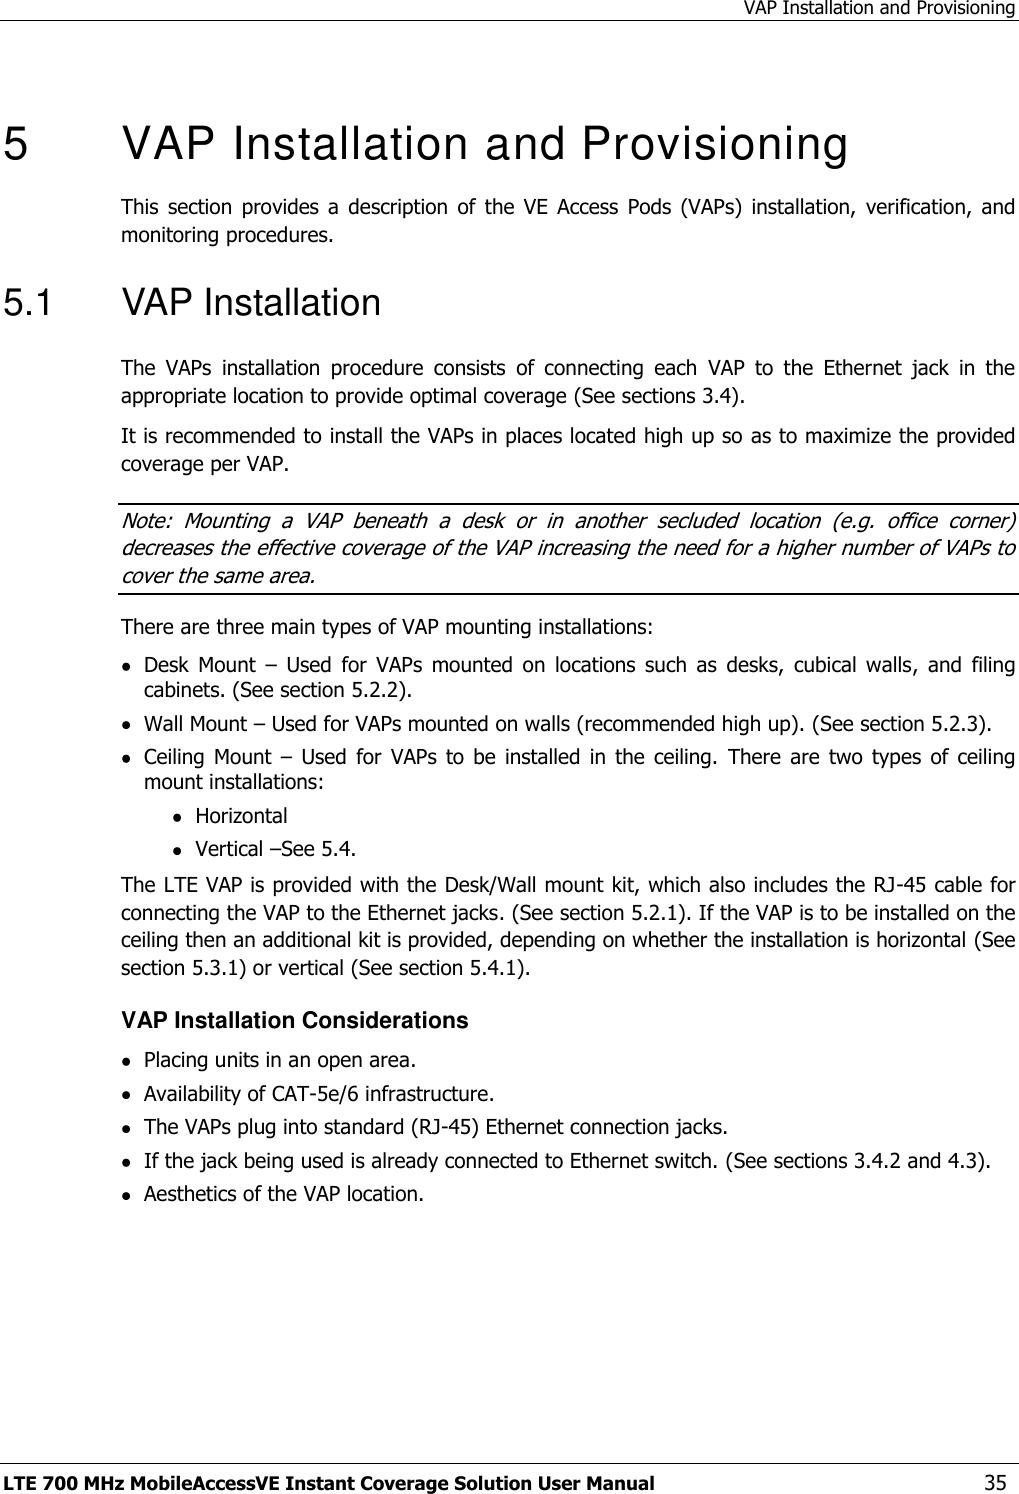 VAP Installation and Provisioning LTE 700 MHz MobileAccessVE Instant Coverage Solution User Manual  35  5  VAP Installation and Provisioning This  section  provides  a  description  of  the  VE  Access  Pods  (VAPs)  installation,  verification,  and monitoring procedures. 5.1  VAP Installation The  VAPs  installation  procedure  consists  of  connecting  each  VAP  to  the  Ethernet  jack  in  the appropriate location to provide optimal coverage (See sections 3.4). It is recommended to install the VAPs in places located high up so as to maximize the provided coverage per VAP. Note:  Mounting  a  VAP  beneath  a  desk  or  in  another  secluded  location  (e.g.  office  corner) decreases the effective coverage of the VAP increasing the need for a higher number of VAPs to cover the same area. There are three main types of VAP mounting installations:  Desk  Mount  –  Used  for  VAPs  mounted  on  locations  such  as  desks,  cubical  walls,  and  filing cabinets. (See section 5.2.2).  Wall Mount – Used for VAPs mounted on walls (recommended high up). (See section 5.2.3).  Ceiling  Mount  –  Used  for  VAPs  to be  installed  in  the  ceiling.  There  are  two  types  of  ceiling mount installations:  Horizontal  Vertical –See 5.4. The LTE VAP is provided with the Desk/Wall mount kit, which also includes the RJ-45 cable for connecting the VAP to the Ethernet jacks. (See section 5.2.1). If the VAP is to be installed on the ceiling then an additional kit is provided, depending on whether the installation is horizontal (See section 5.3.1) or vertical (See section 5.4.1). VAP Installation Considerations  Placing units in an open area.  Availability of CAT-5e/6 infrastructure.  The VAPs plug into standard (RJ-45) Ethernet connection jacks.  If the jack being used is already connected to Ethernet switch. (See sections 3.4.2 and 4.3).  Aesthetics of the VAP location. 